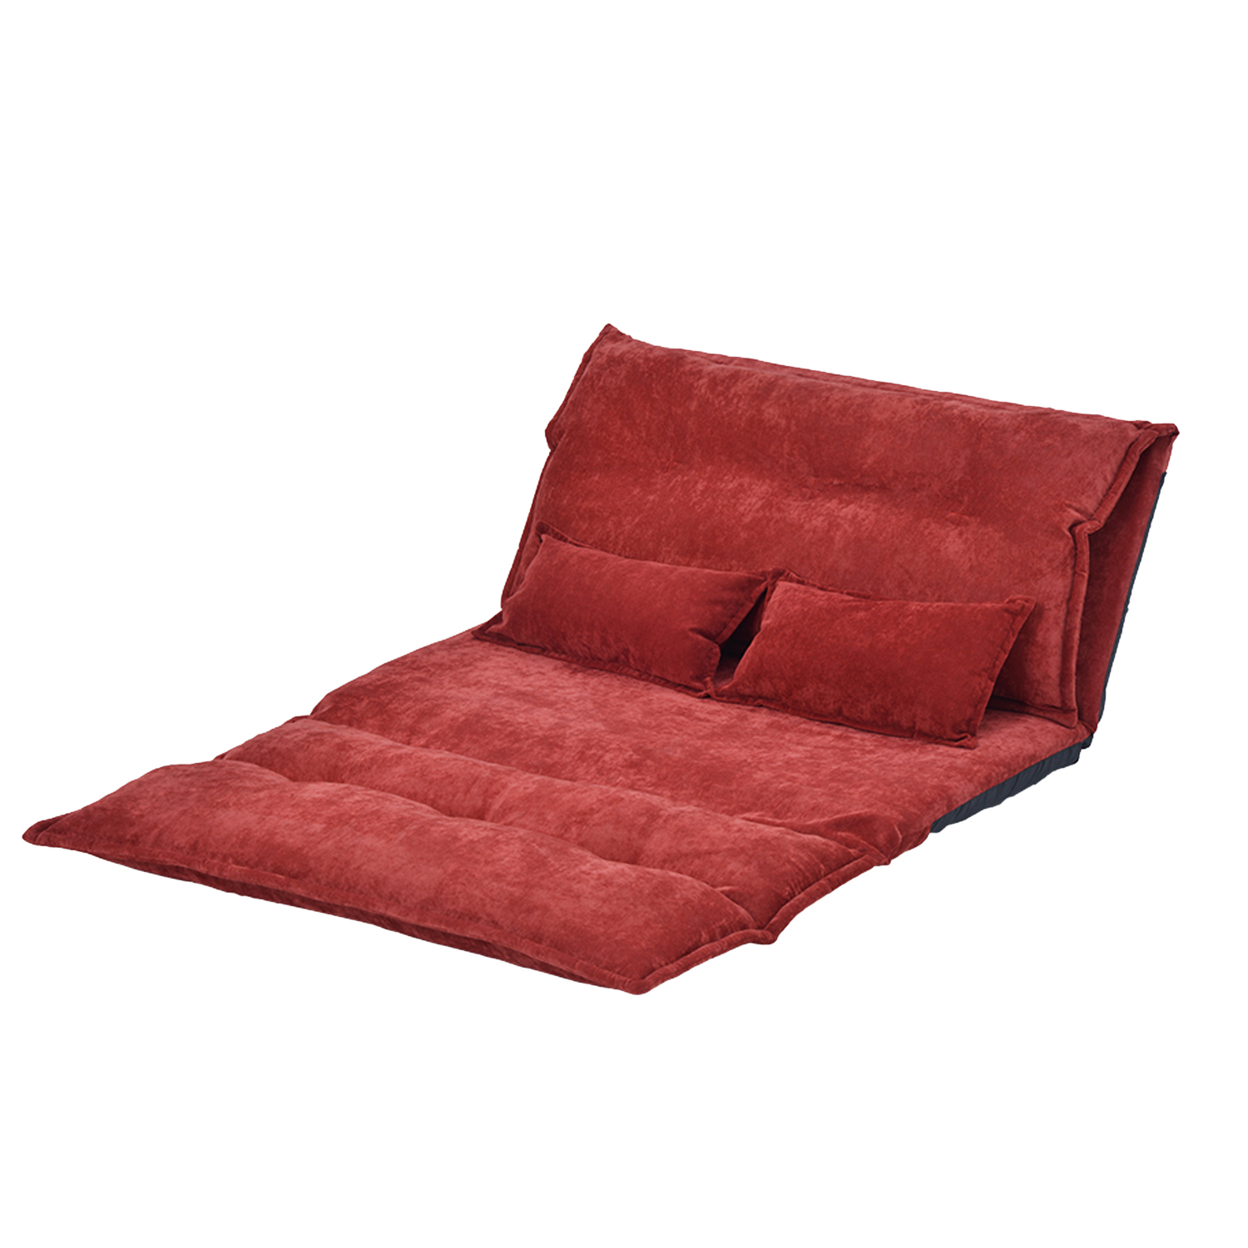 Sofa Bed With 5 Way Adjustable Back And Pillows, Red- Saltoro Sherpi